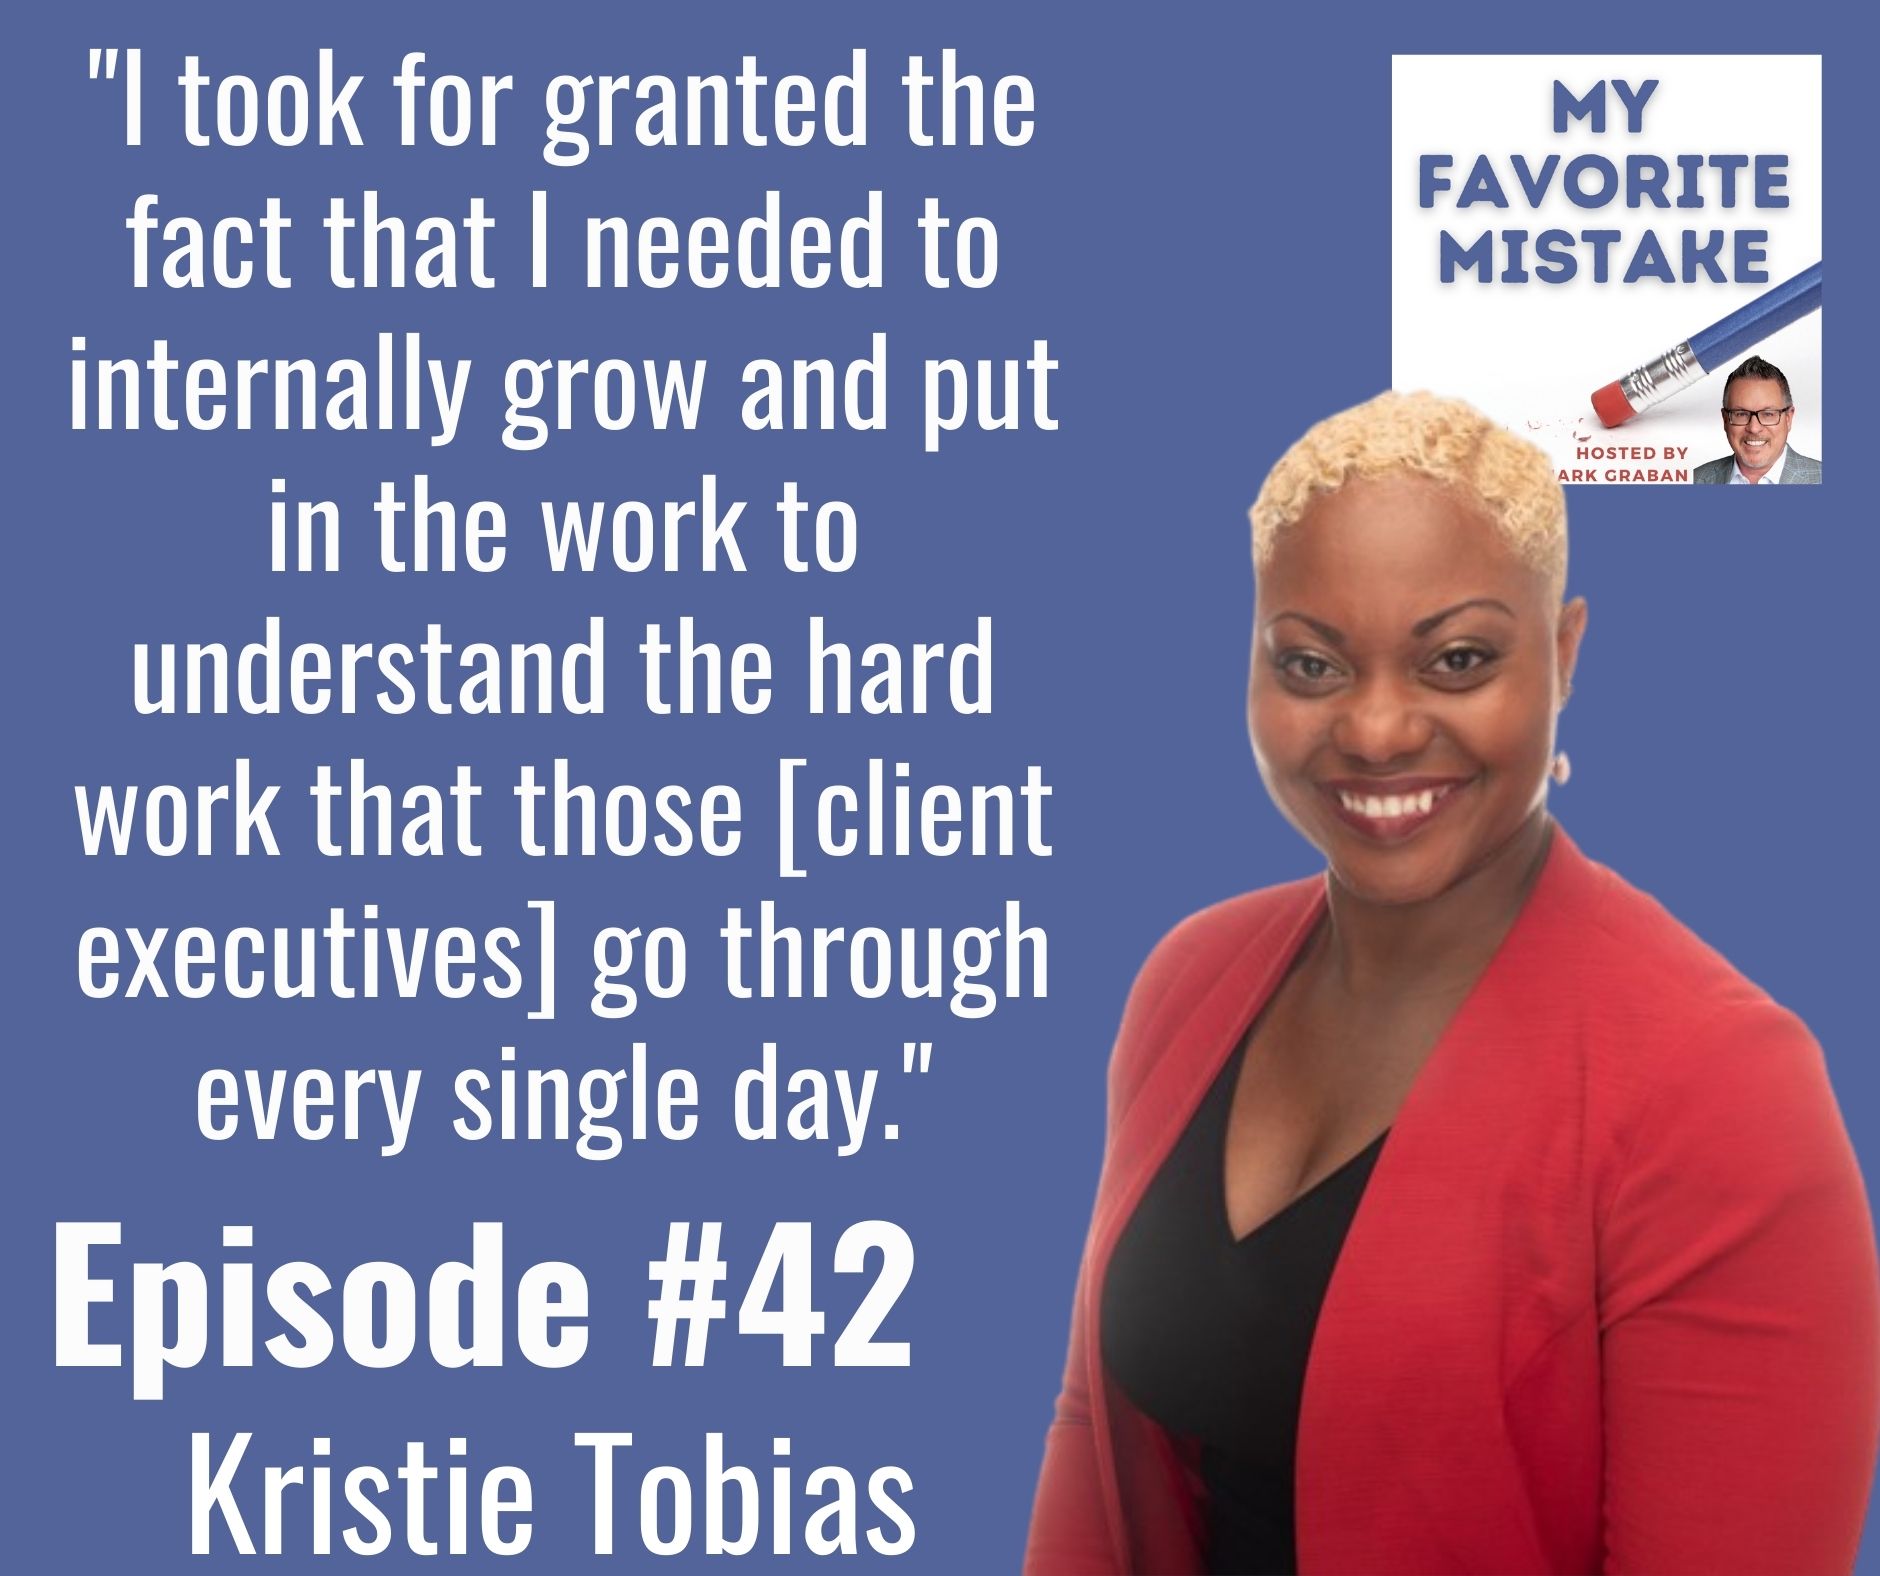 "I took for granted the fact that I needed to internally grow and put in the work to understand the hard work that those [client executives] go through every single day."